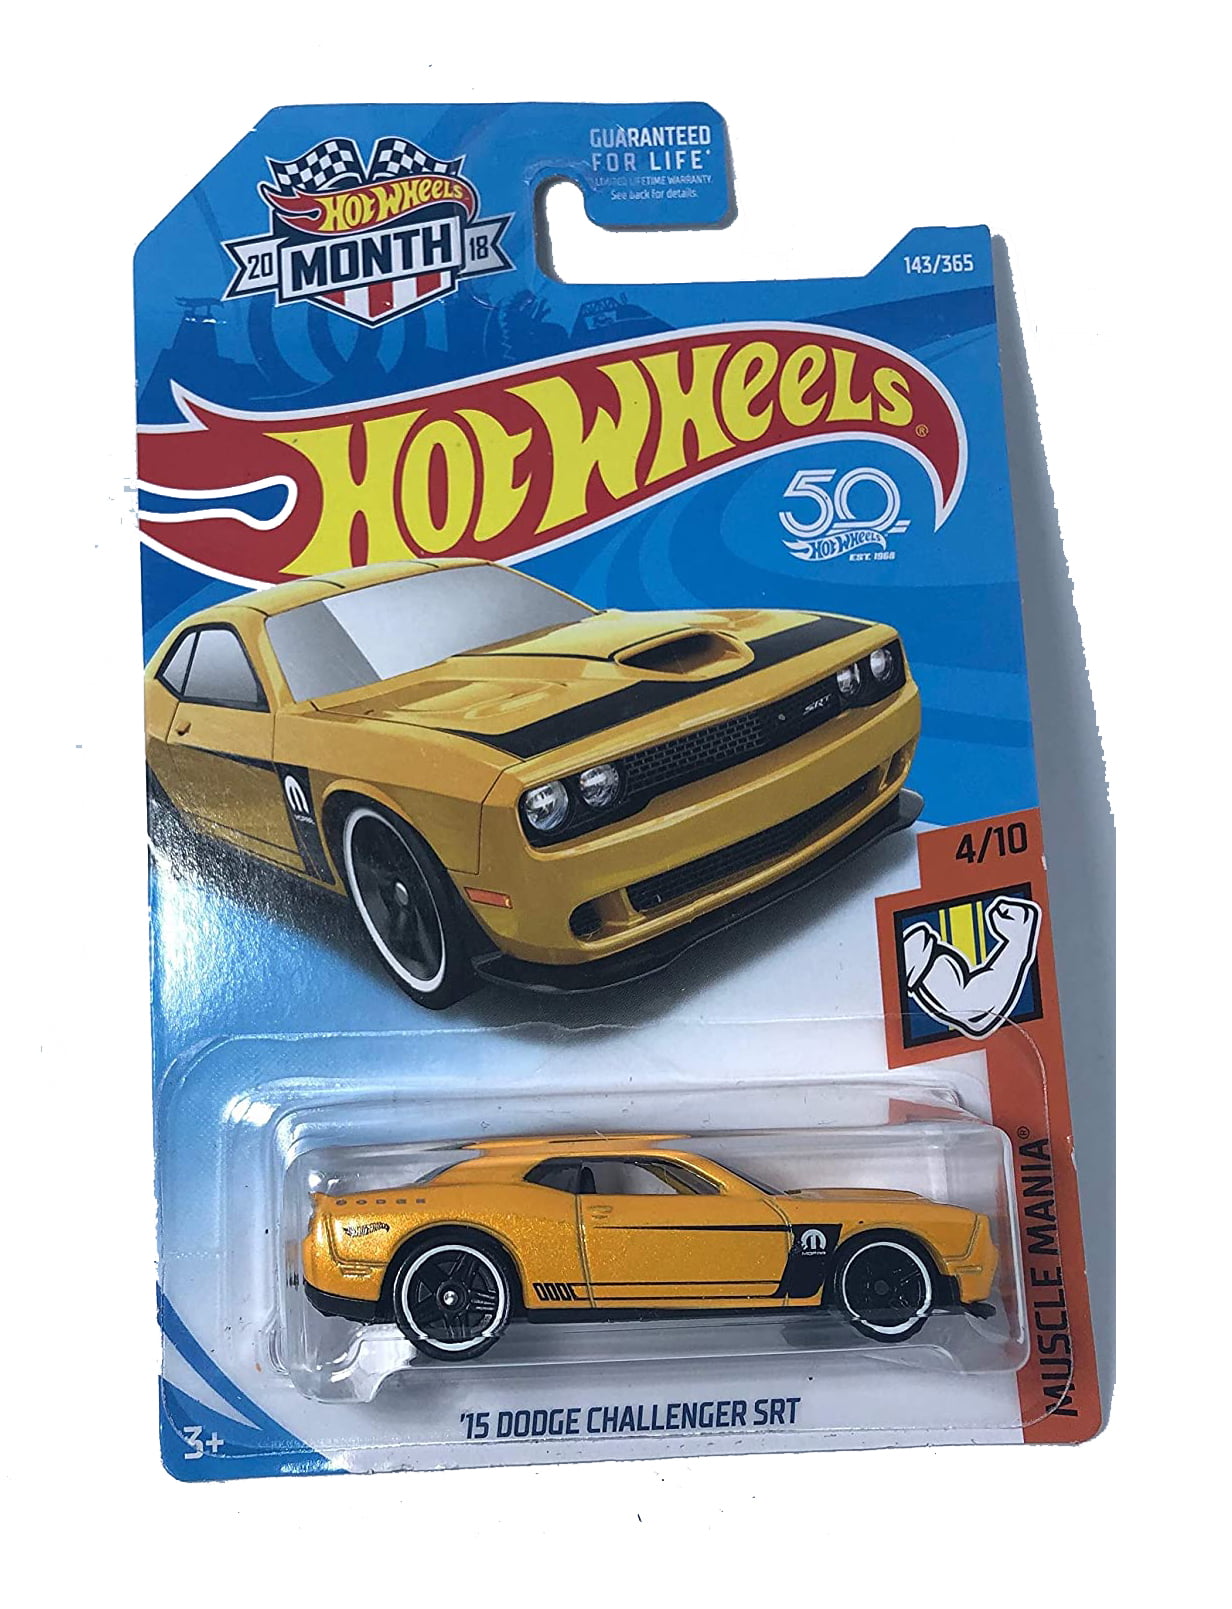 Hot Wheels 50th Anniversary 2018 Muscle Mania '15 Dodge Challenger SRT  [Yellow] 4/10 (143/365).